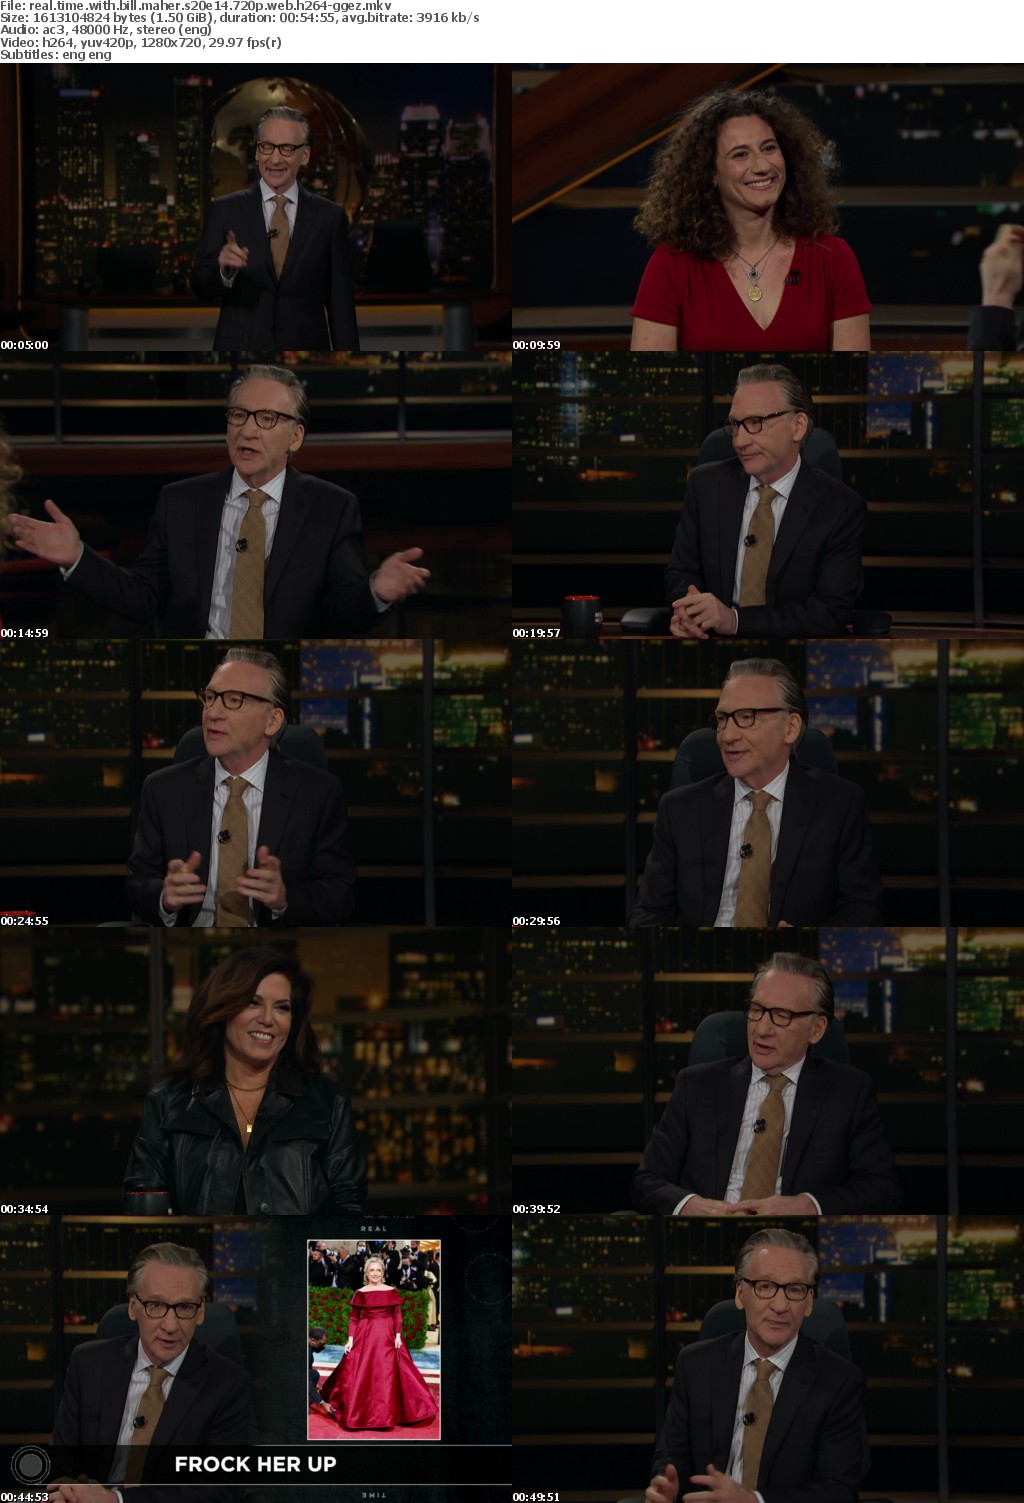 Real Time with Bill Maher S20E14 720p WEB H264-GGEZ